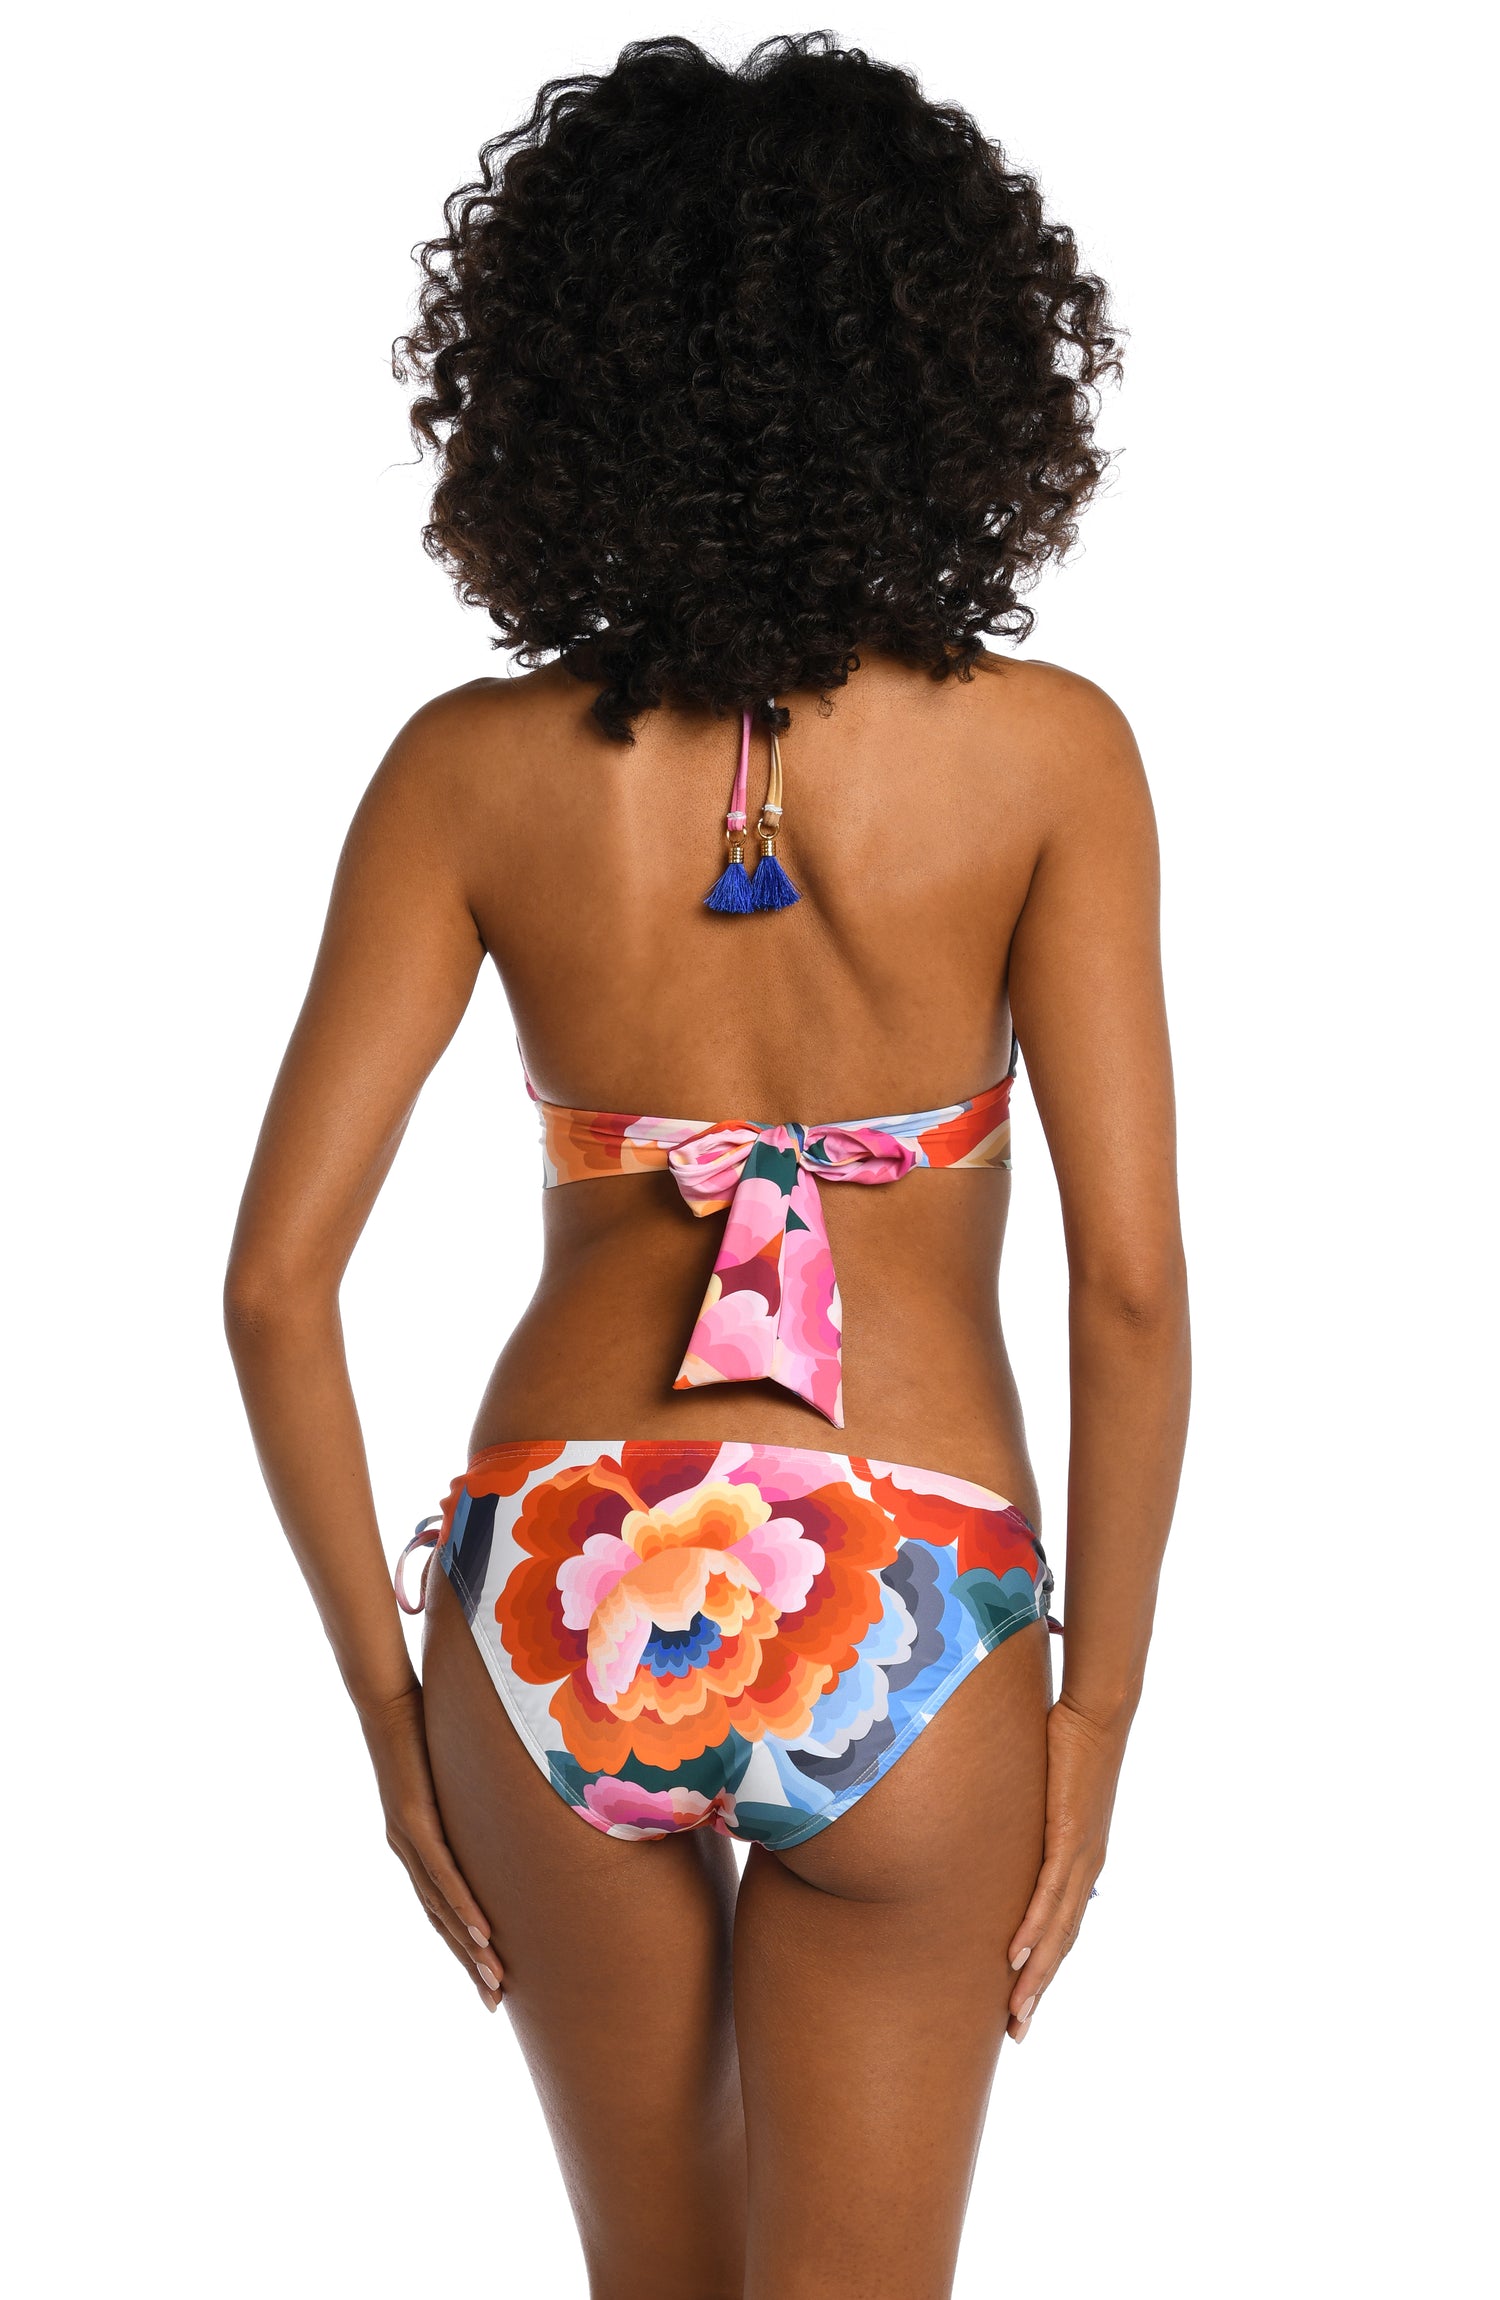 Model is wearing a multi colored floral printed banded halter triangle top from our Floral Rhythm collection!